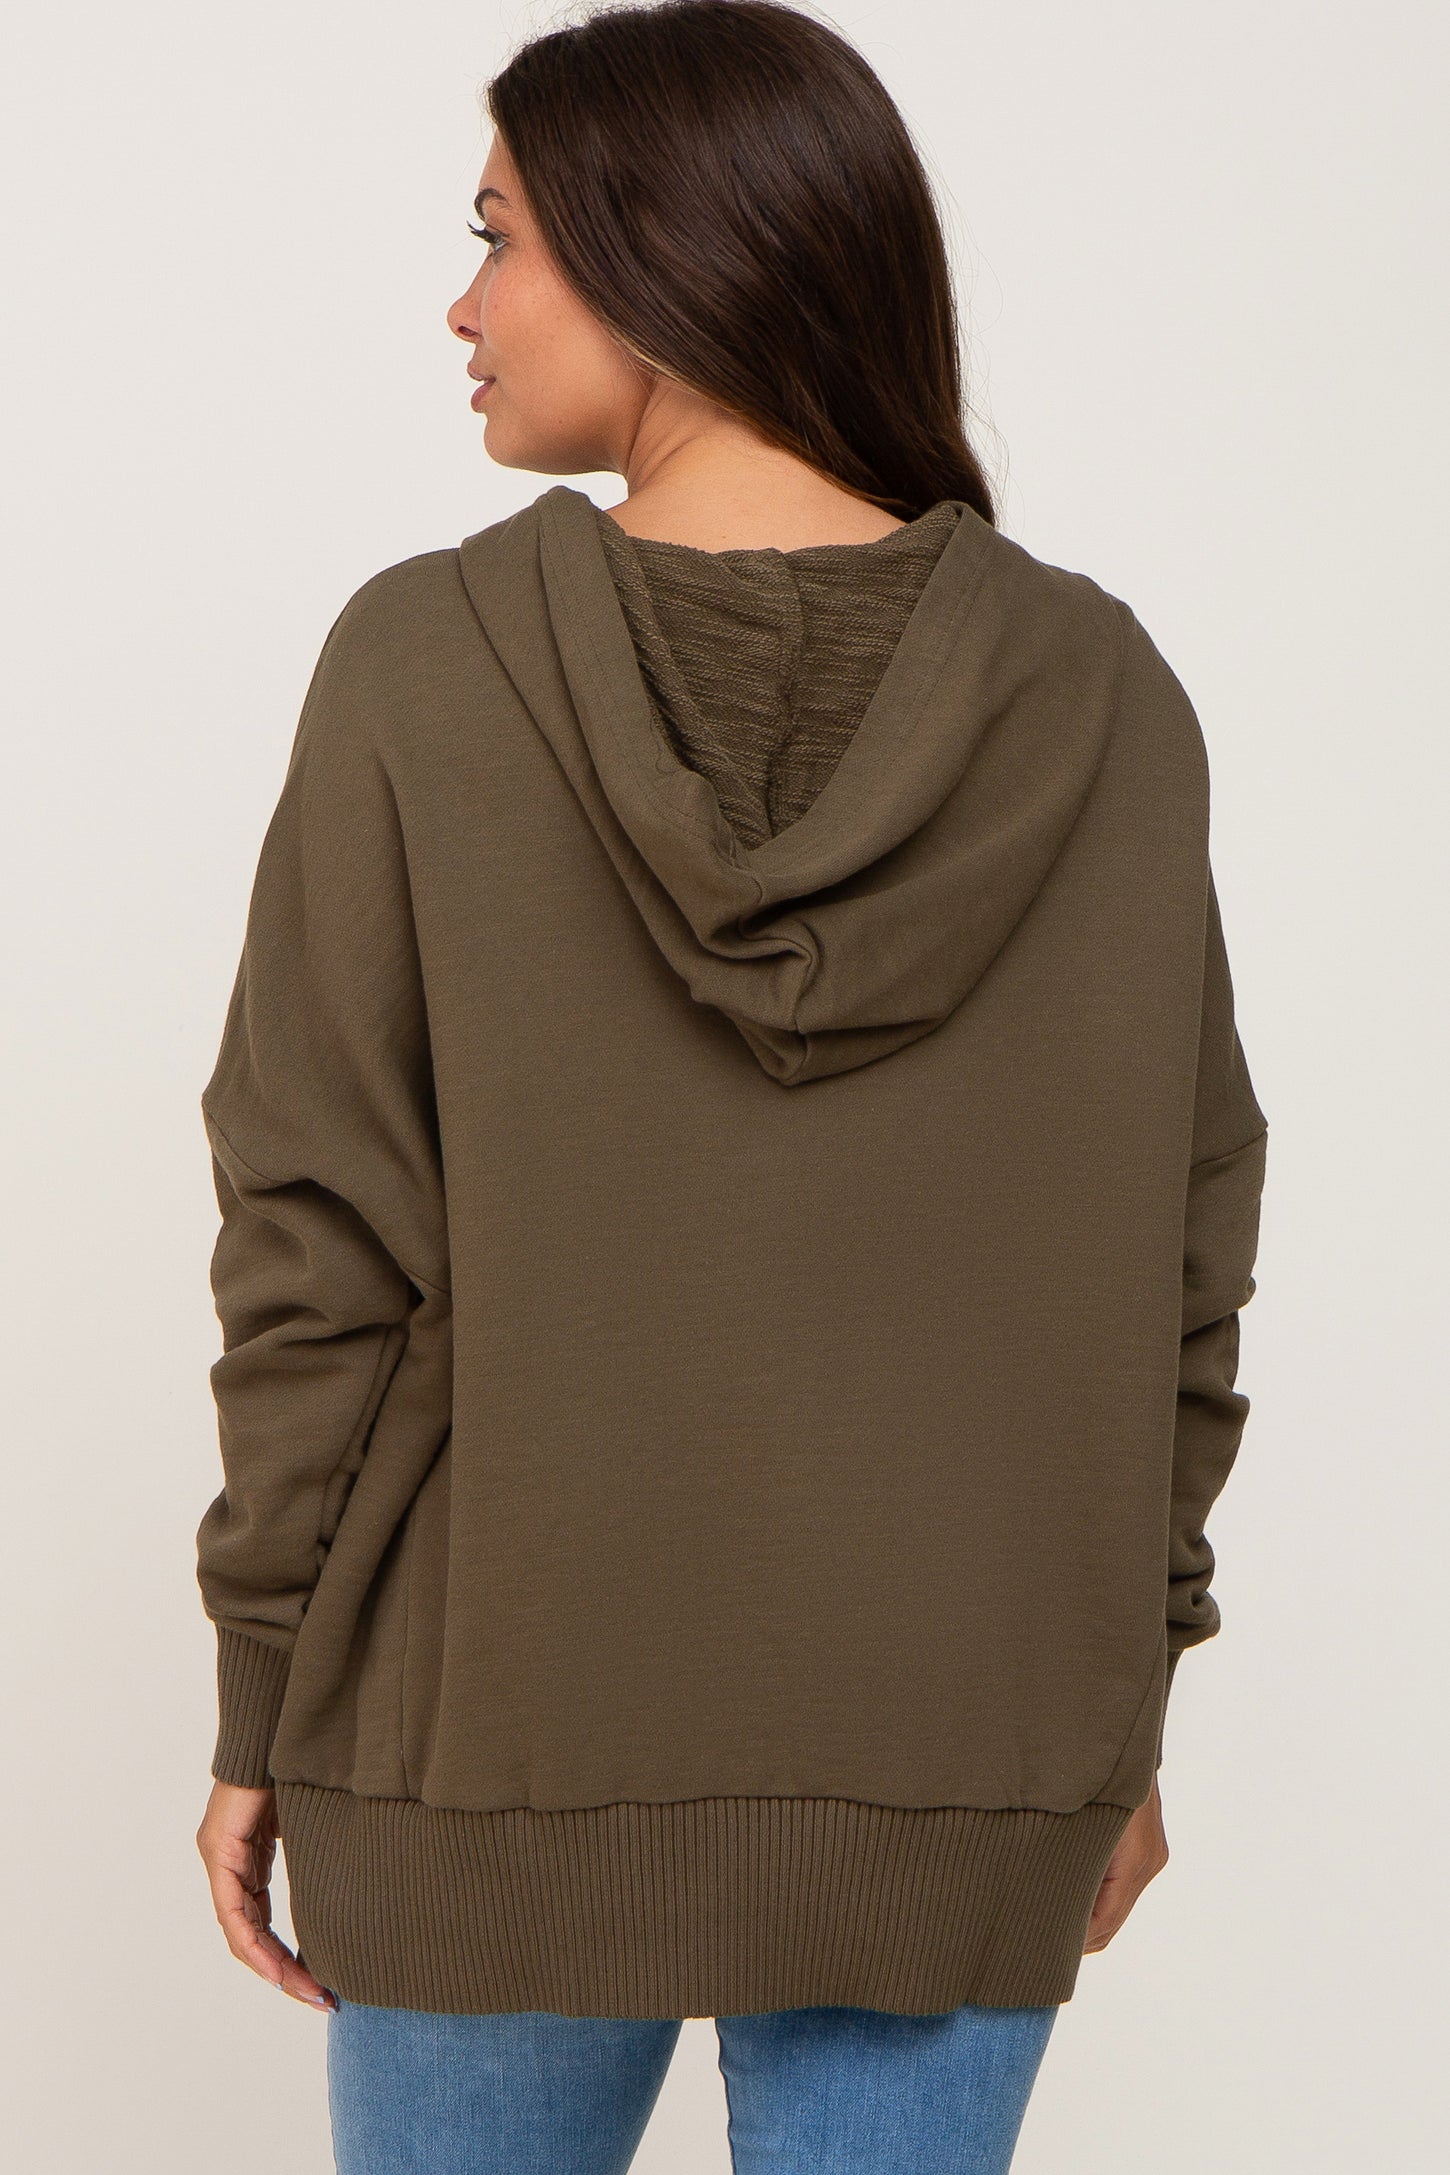 Olive Button Front Ribbed Trim Hooded Maternity Sweatshirt– PinkBlush